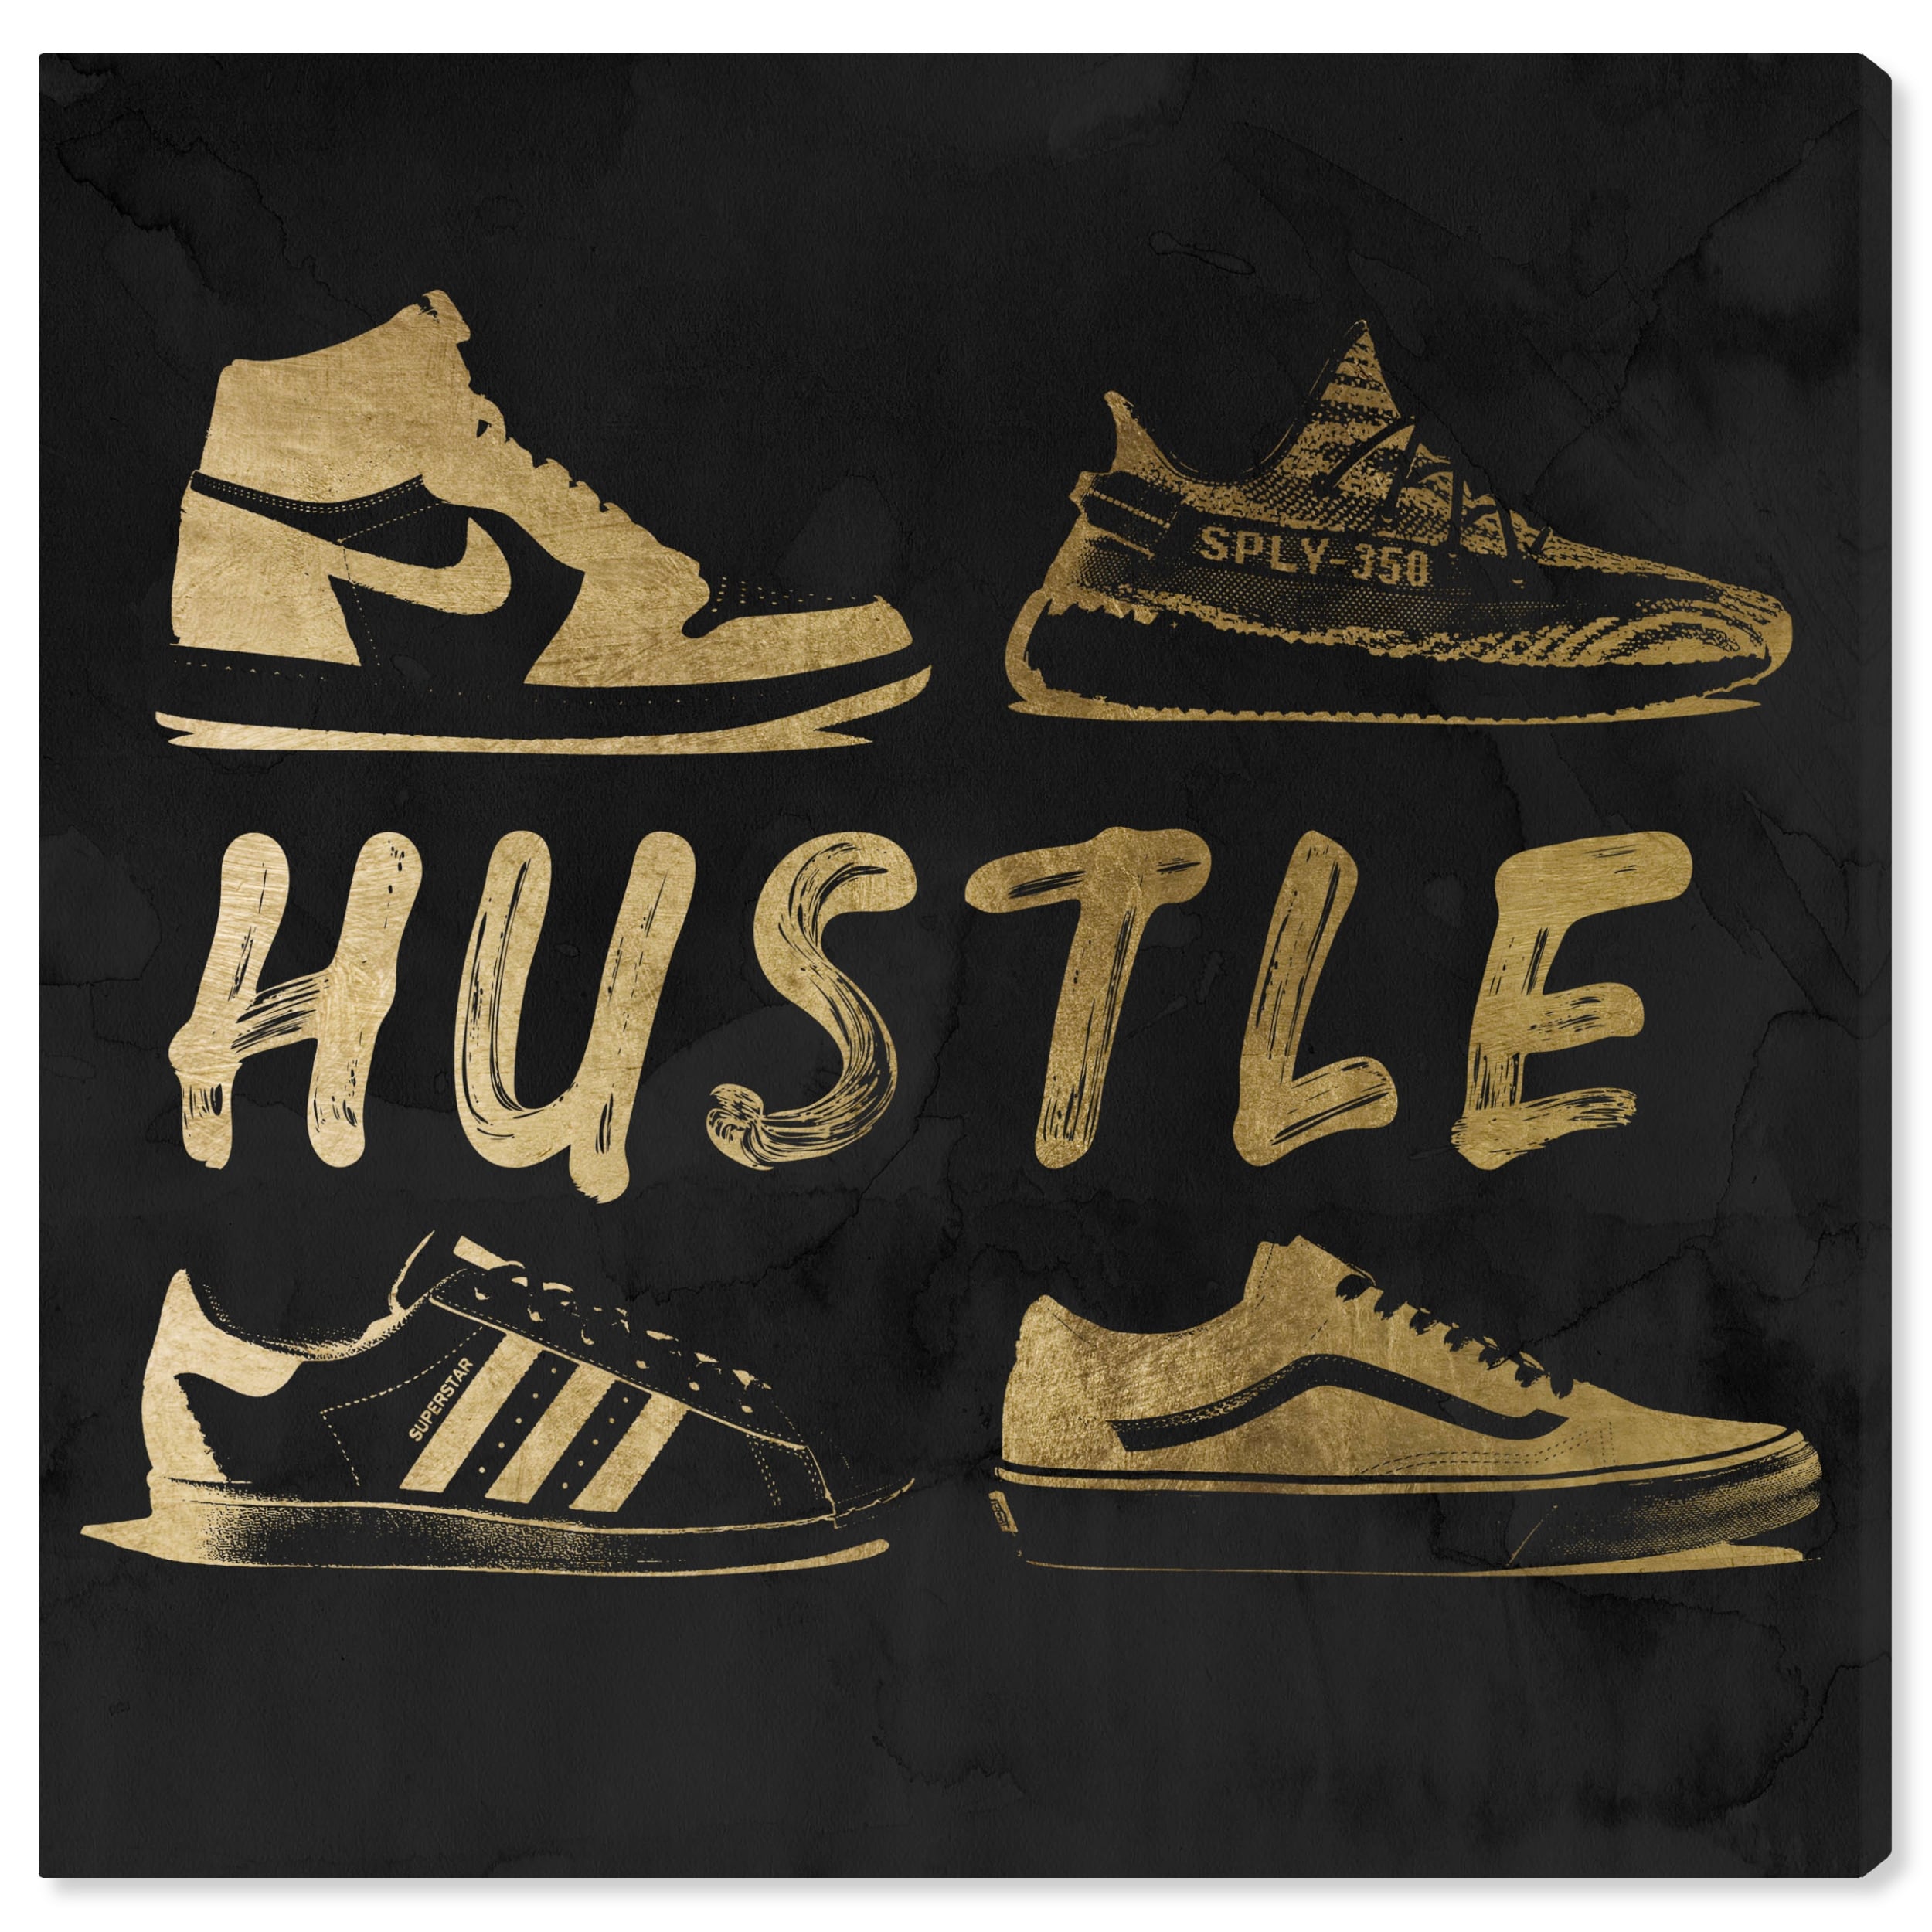 Oliver Gal 'Hustle Sneakers' Glam Black Wall Art Canvas Print